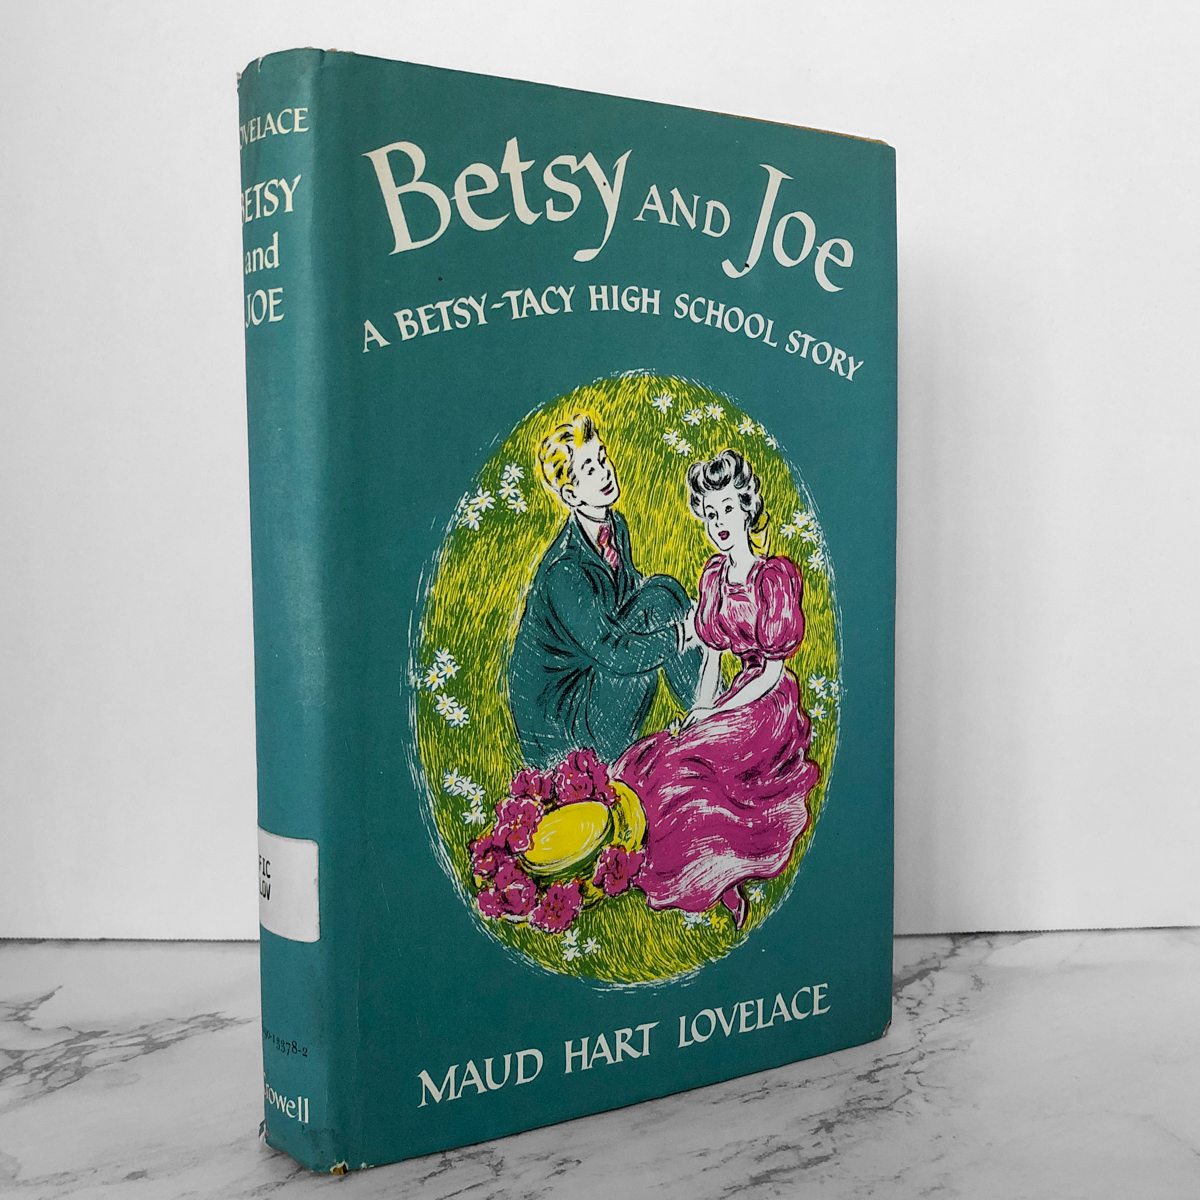 Betsy and Joe by Maud Hart Lovelace [FIRST EDITION] BetsyTacy